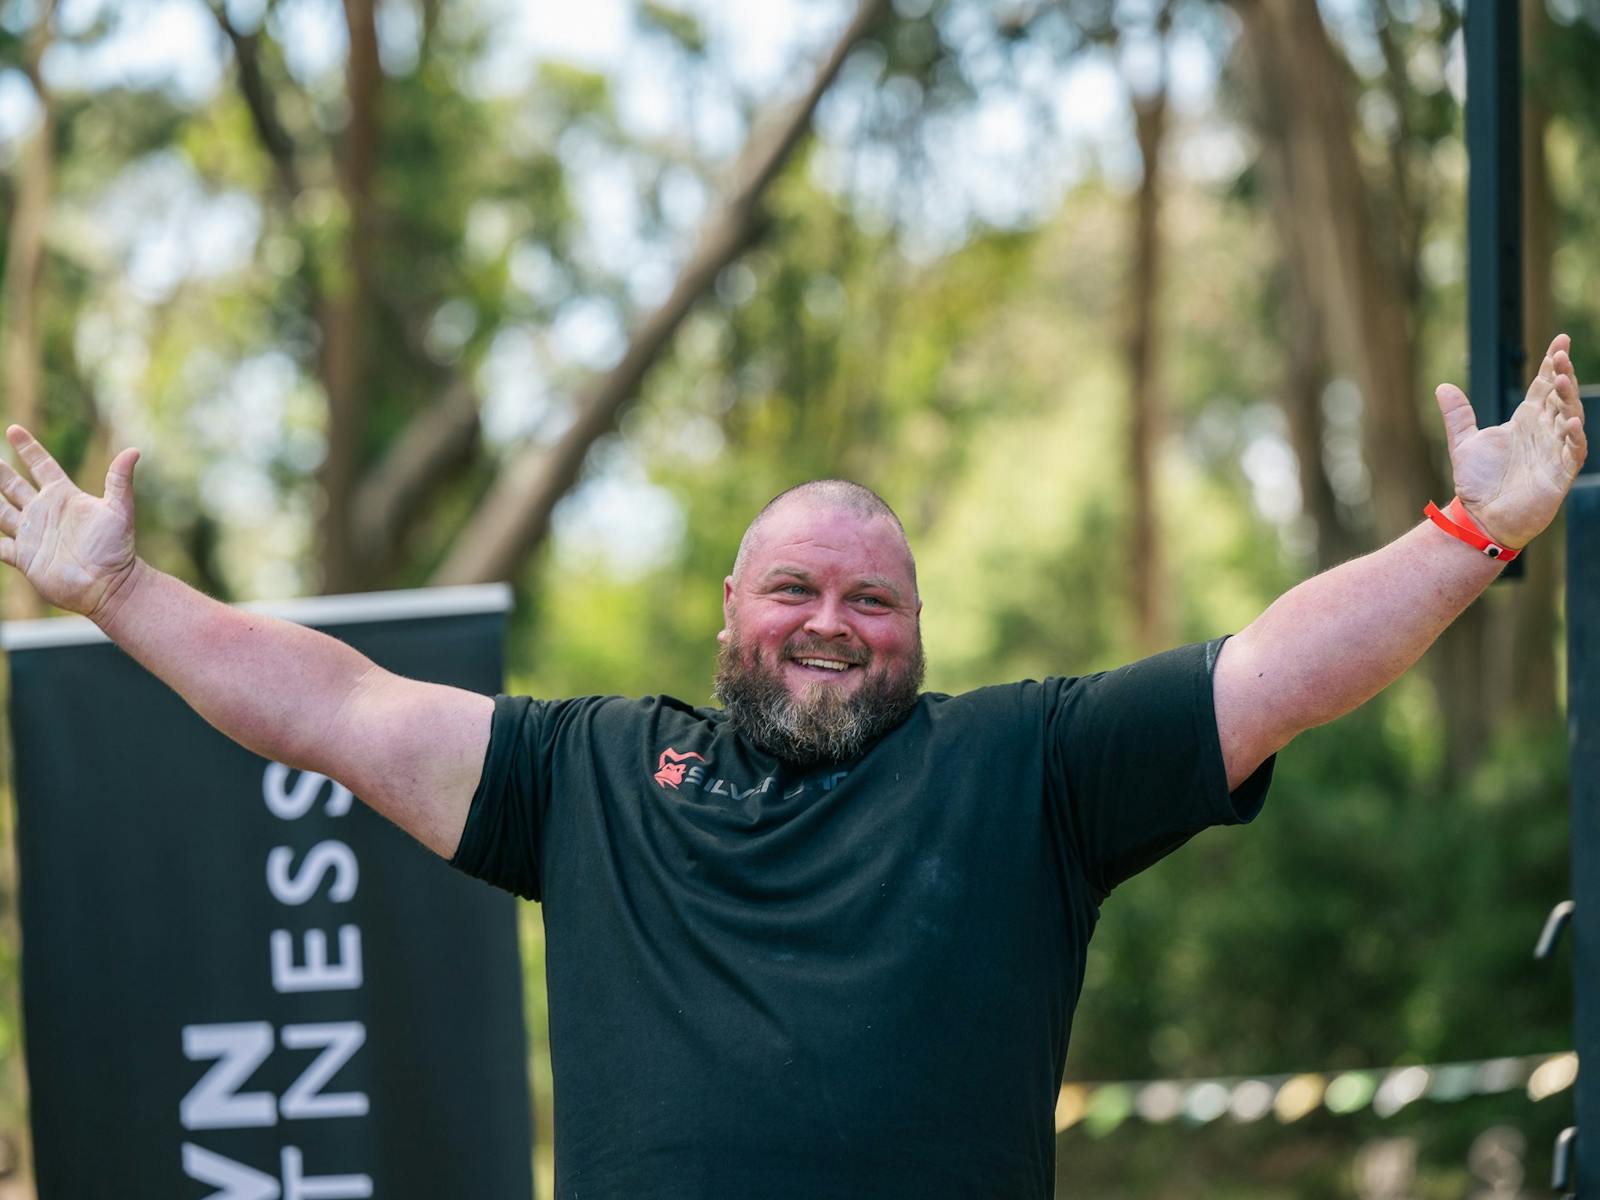 A strongperson competitor raising his hands after winning a competition